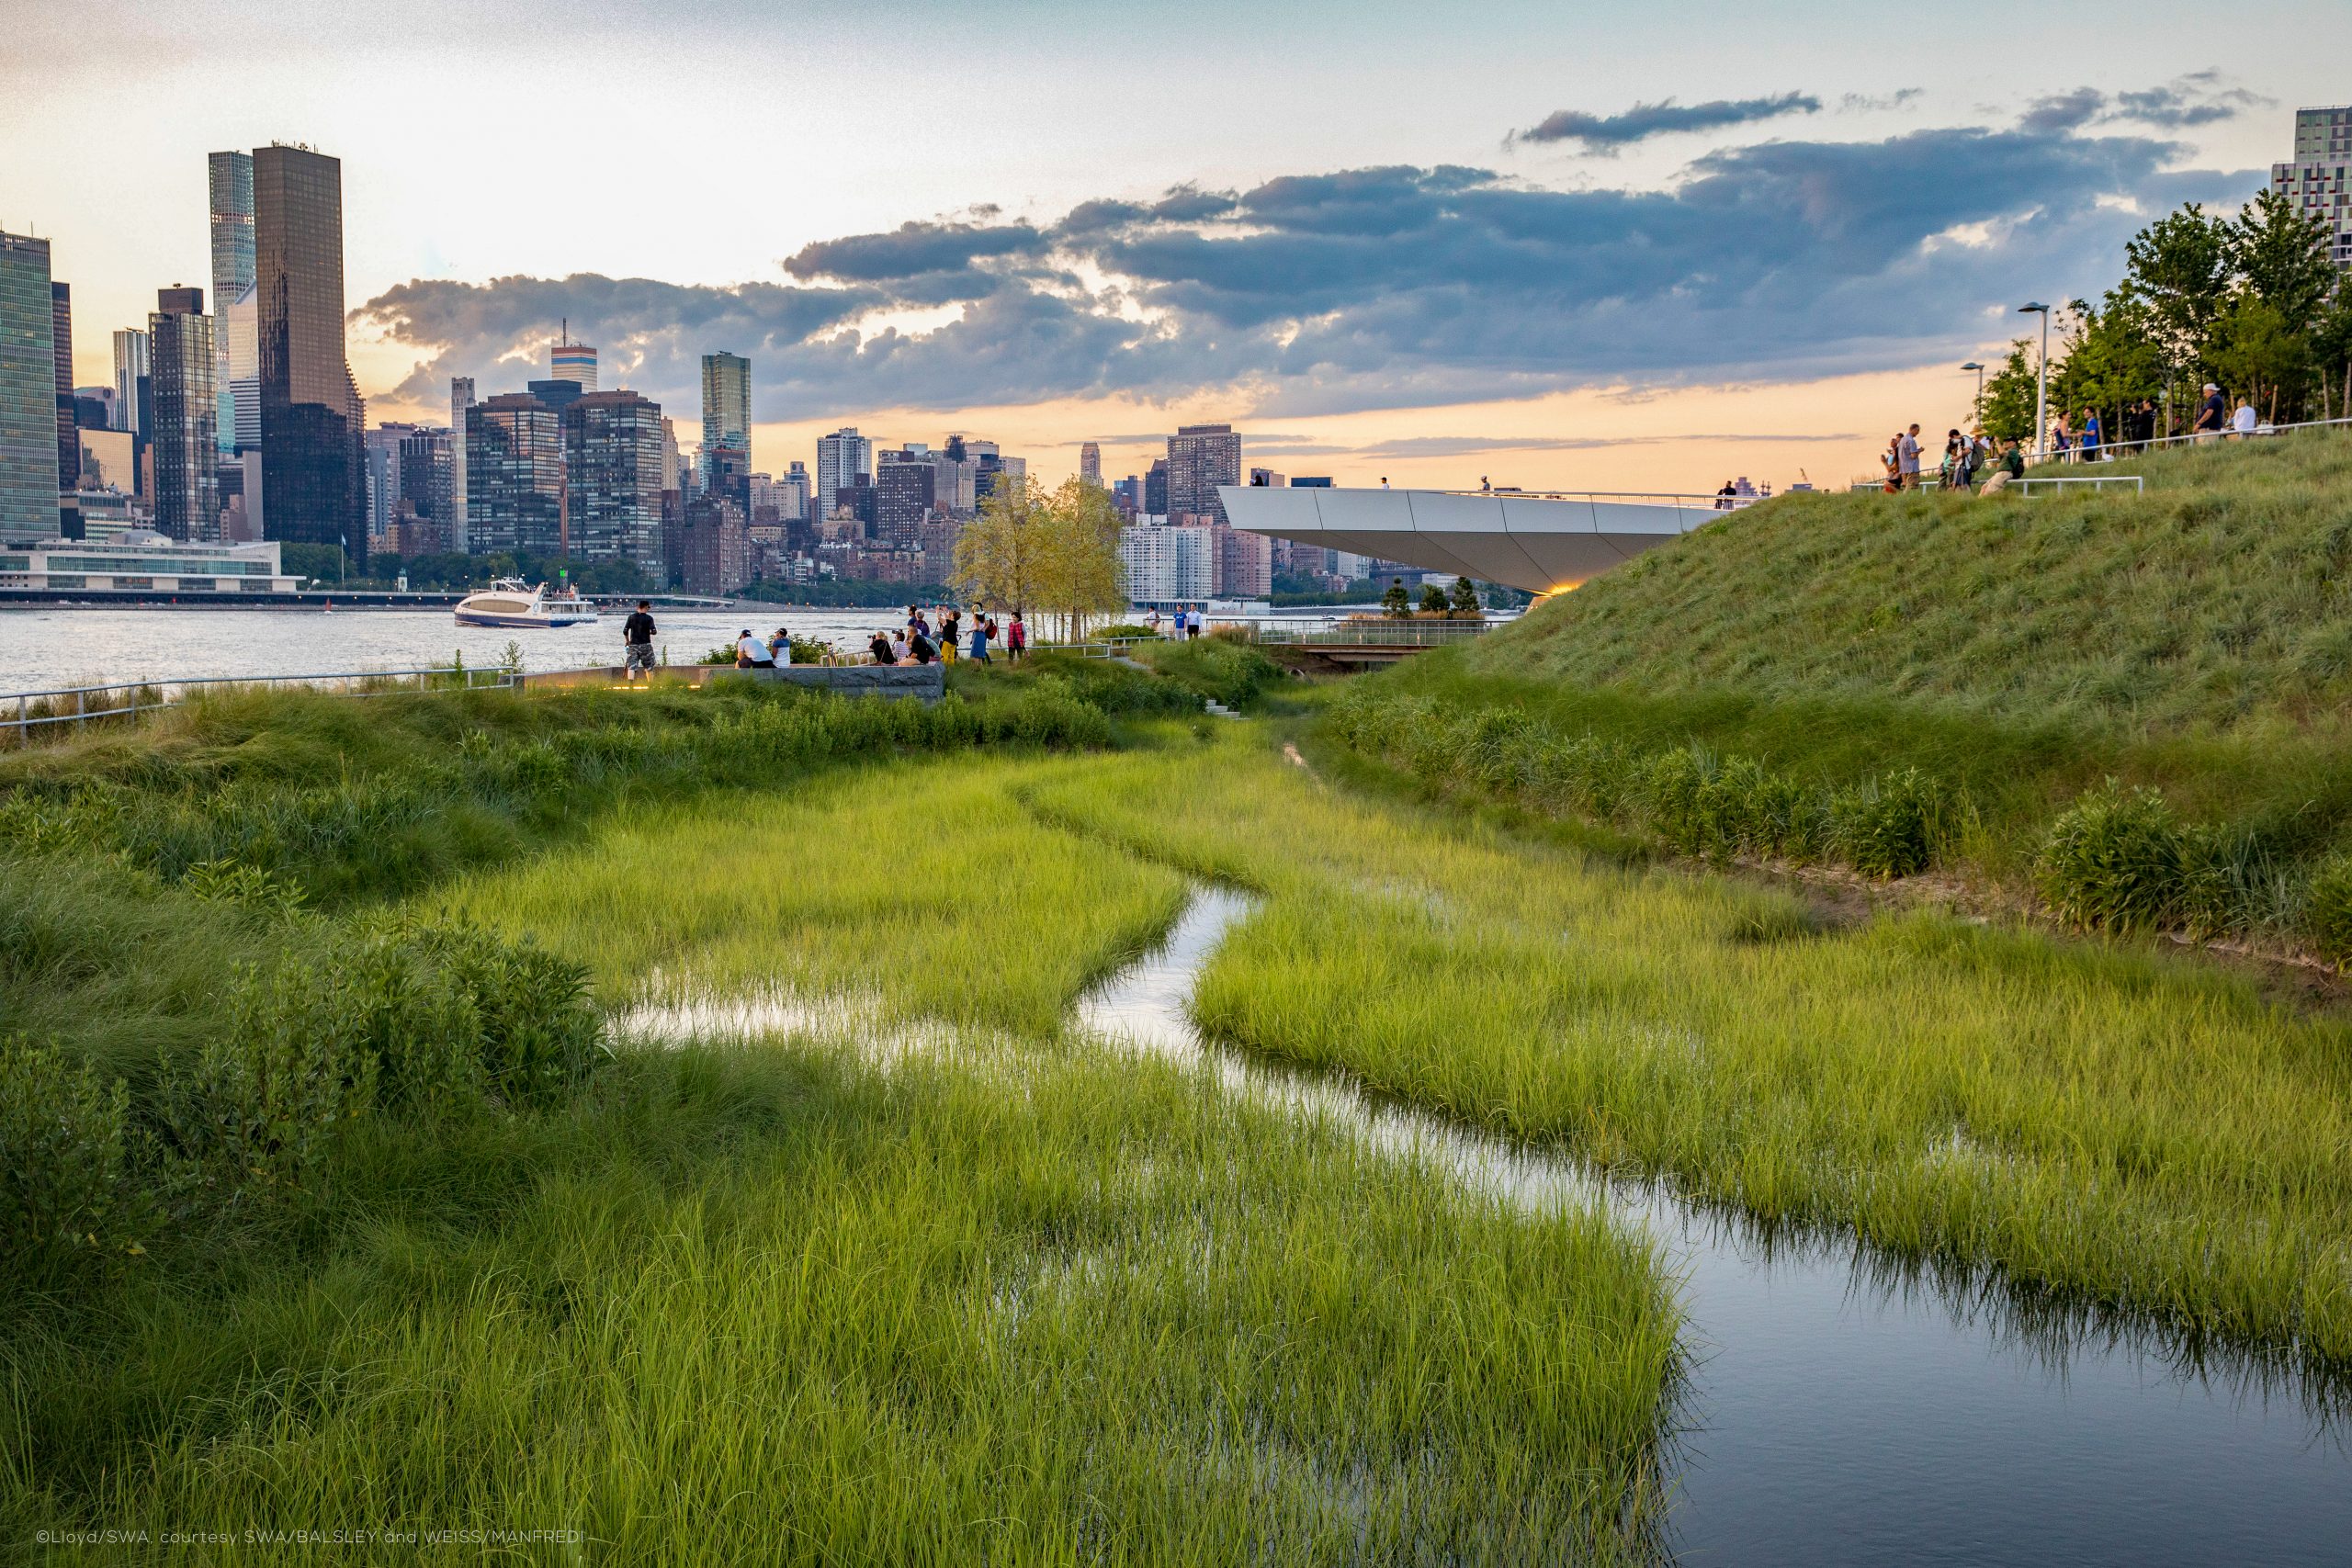 Hunter’s Point South Waterfront Park Featured in “The Thin Green Line” Article